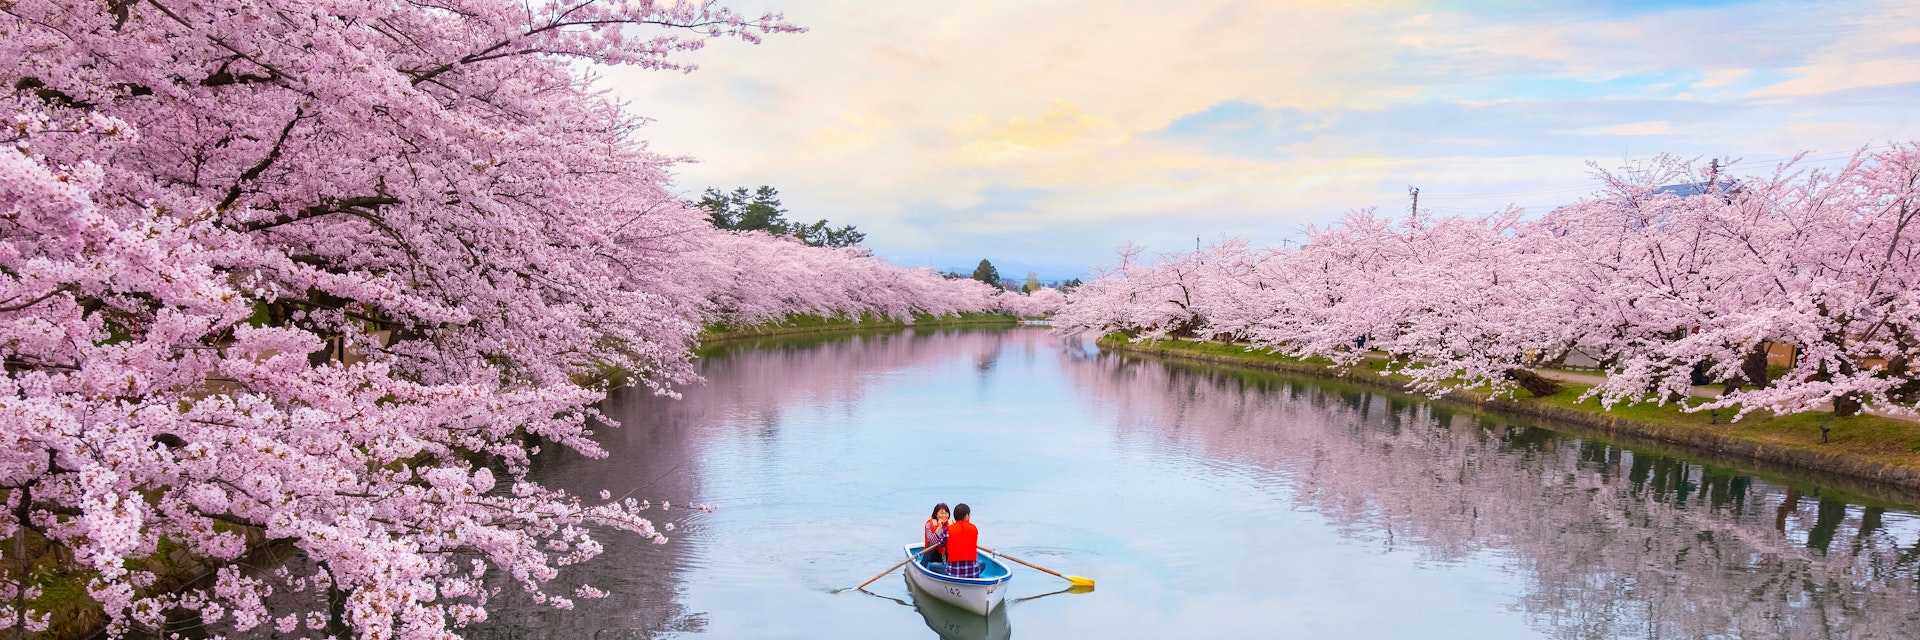 April 23, 2018: A couple in a rowboat paddle past sakura (cherry blossoms) in full bloom at Hirosaki park.